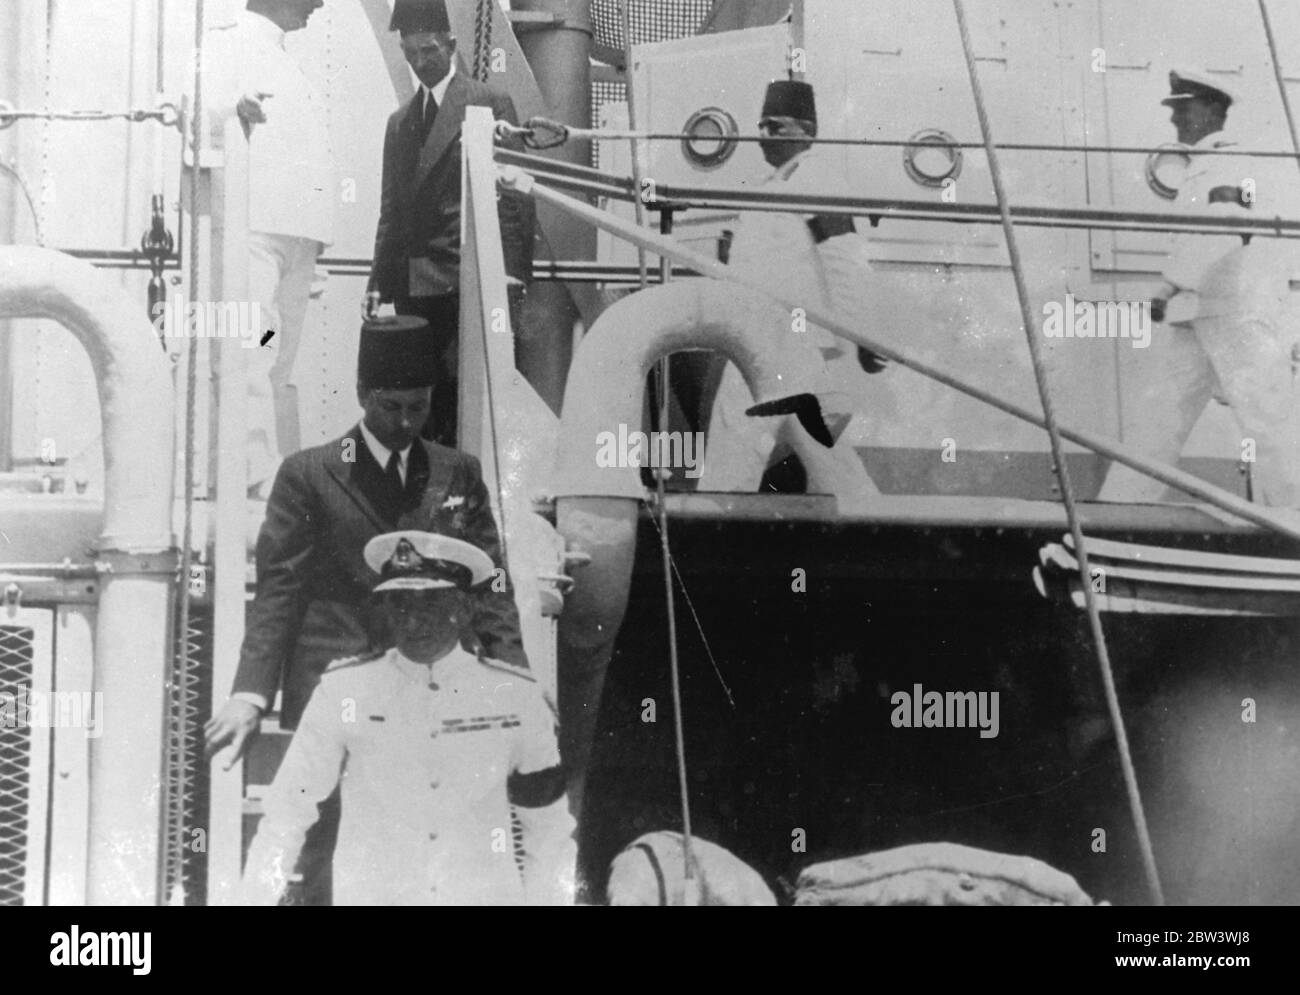 King Farouk Inspects Warships Of The British Fleet At Alexandria . King Farouk of Egypt watched ships of Britain ' s Mediterranean fleet pass in review when he paid a visit of inspection to the  Queen Elizabeth  , flagship of Admiral Sir Dudley Pound , at Alexandria . Following King Farouk ' s visit the Fleet left the port for manoeuvres . Photo shows : King Farouk with Admiral Sir Dudley Pound aboard the  Queen Elizabeth  at Alexandria . 28 Jul 1936 Stock Photo